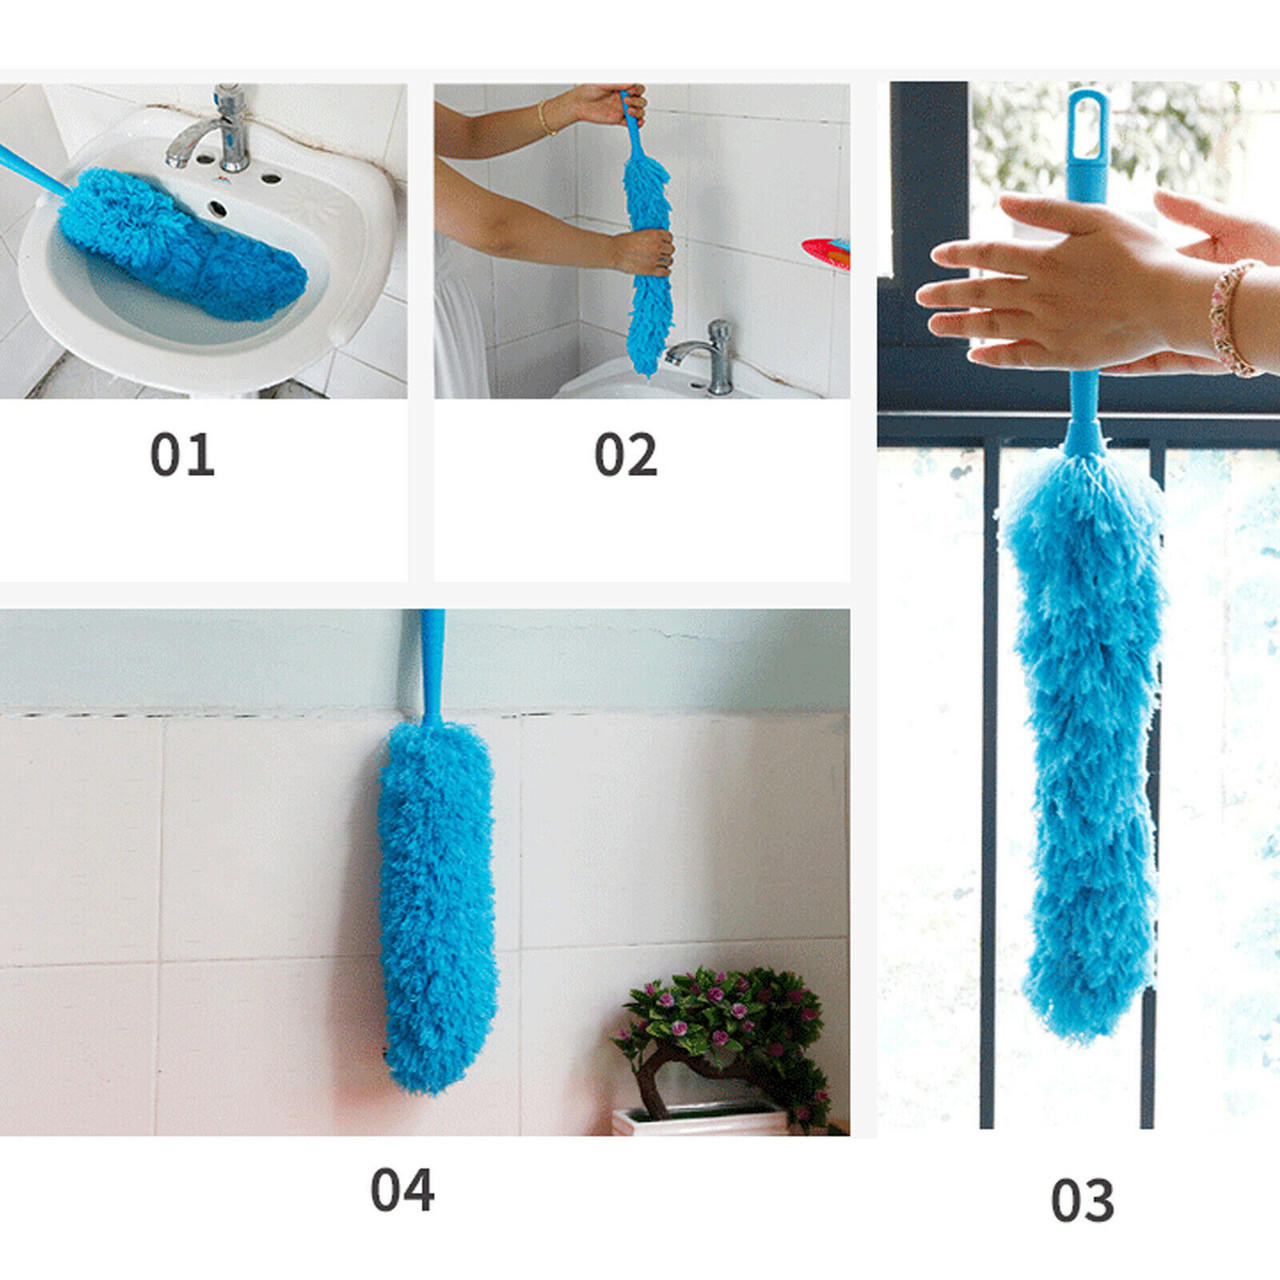 Bendable Fan Cleaning Brush Microfibre Household Dust Remover